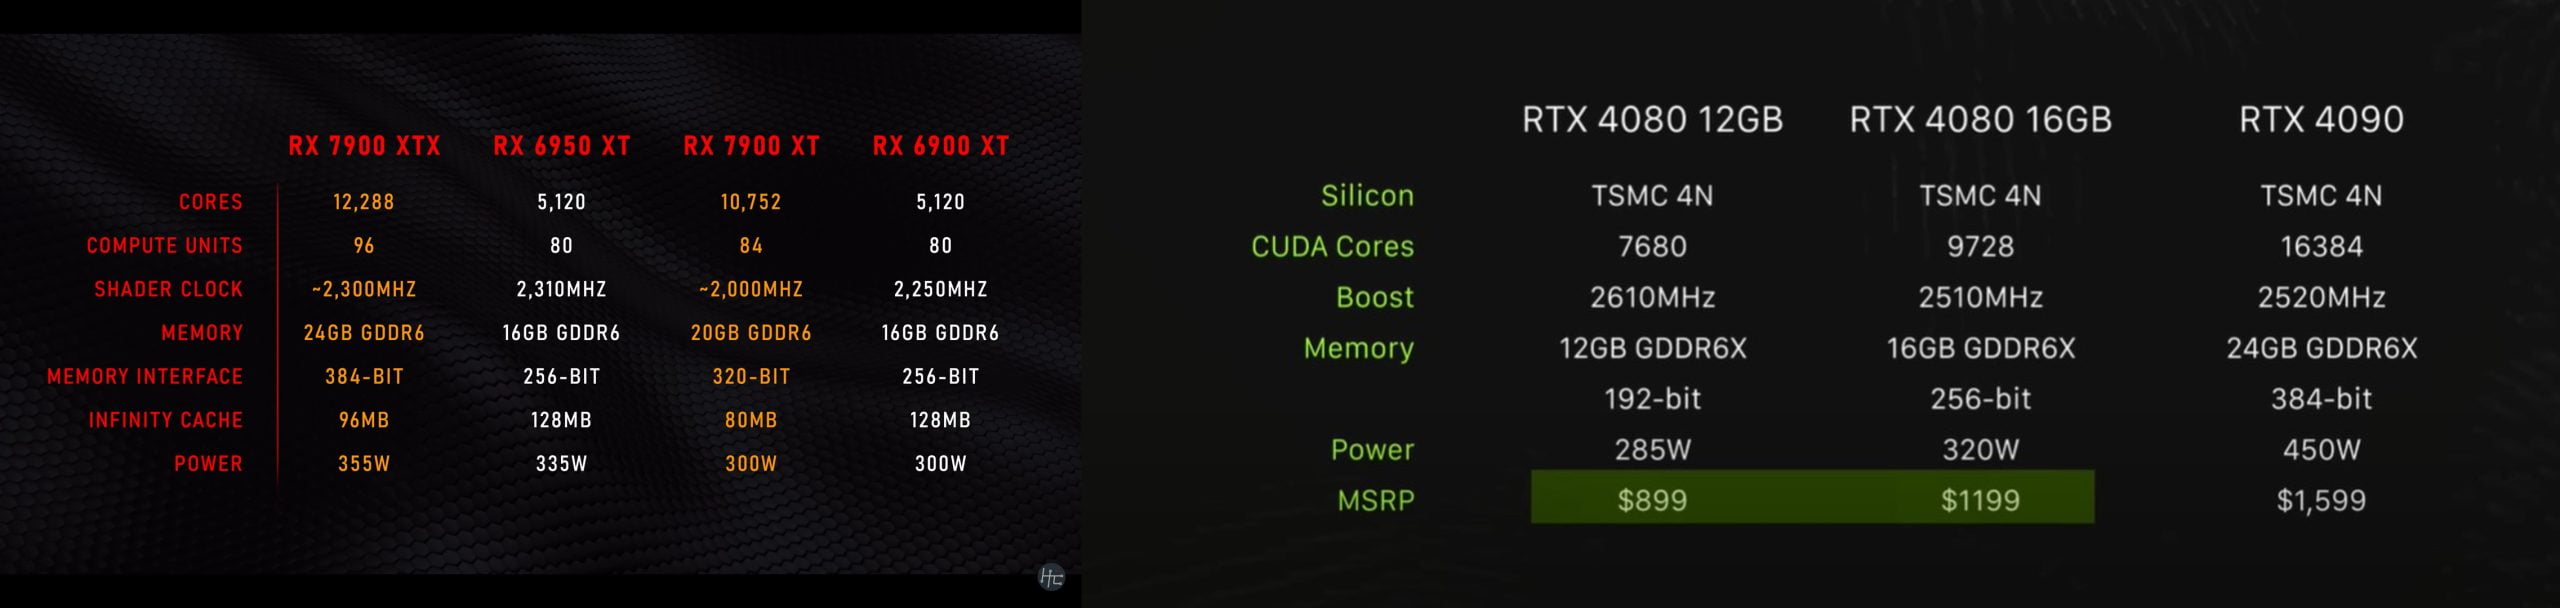 Comparison between AMD and Nvidia GPUs